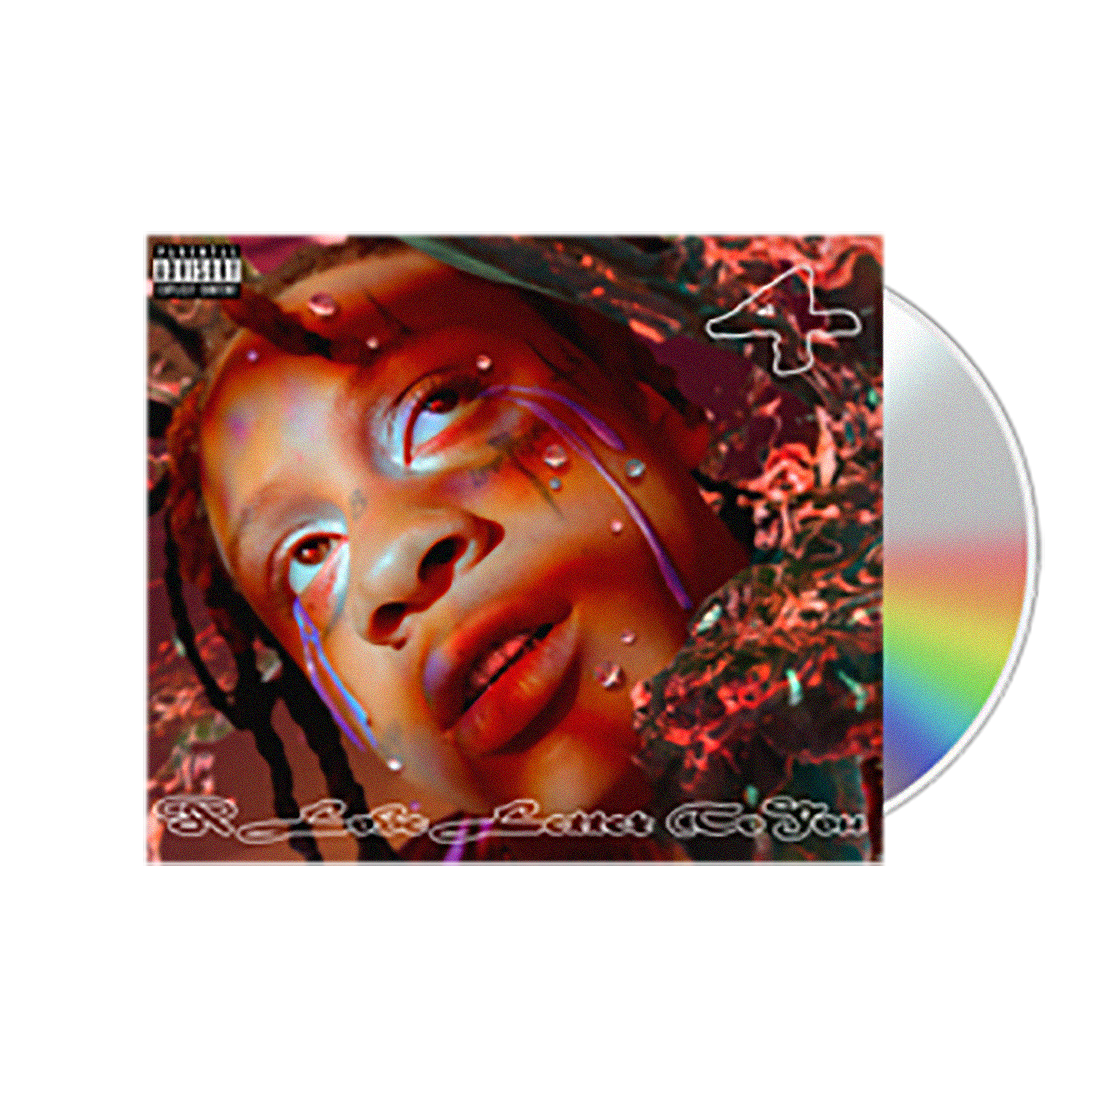 Trippie Redd - A Love Letter To You 4: CD